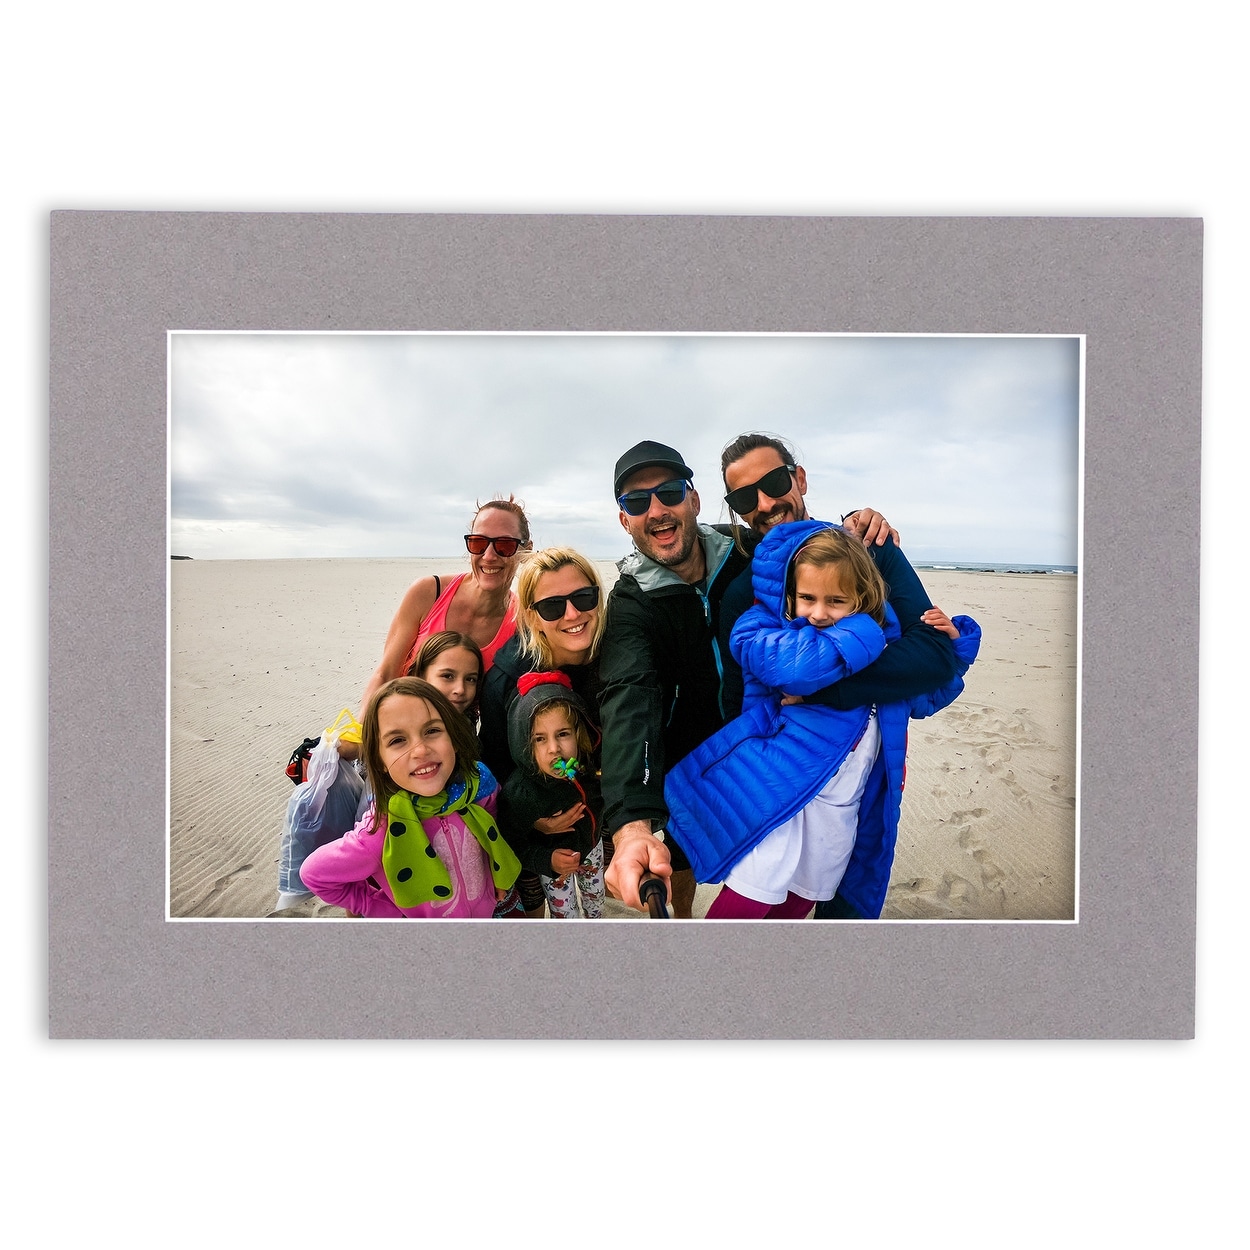 5x7 Mat for 8x10 Frame - Precut Mat Board Acid-Free Charcoal 5x7 Photo  Matte Made to Fit a 8x10 Picture Frame - Bed Bath & Beyond - 38873301